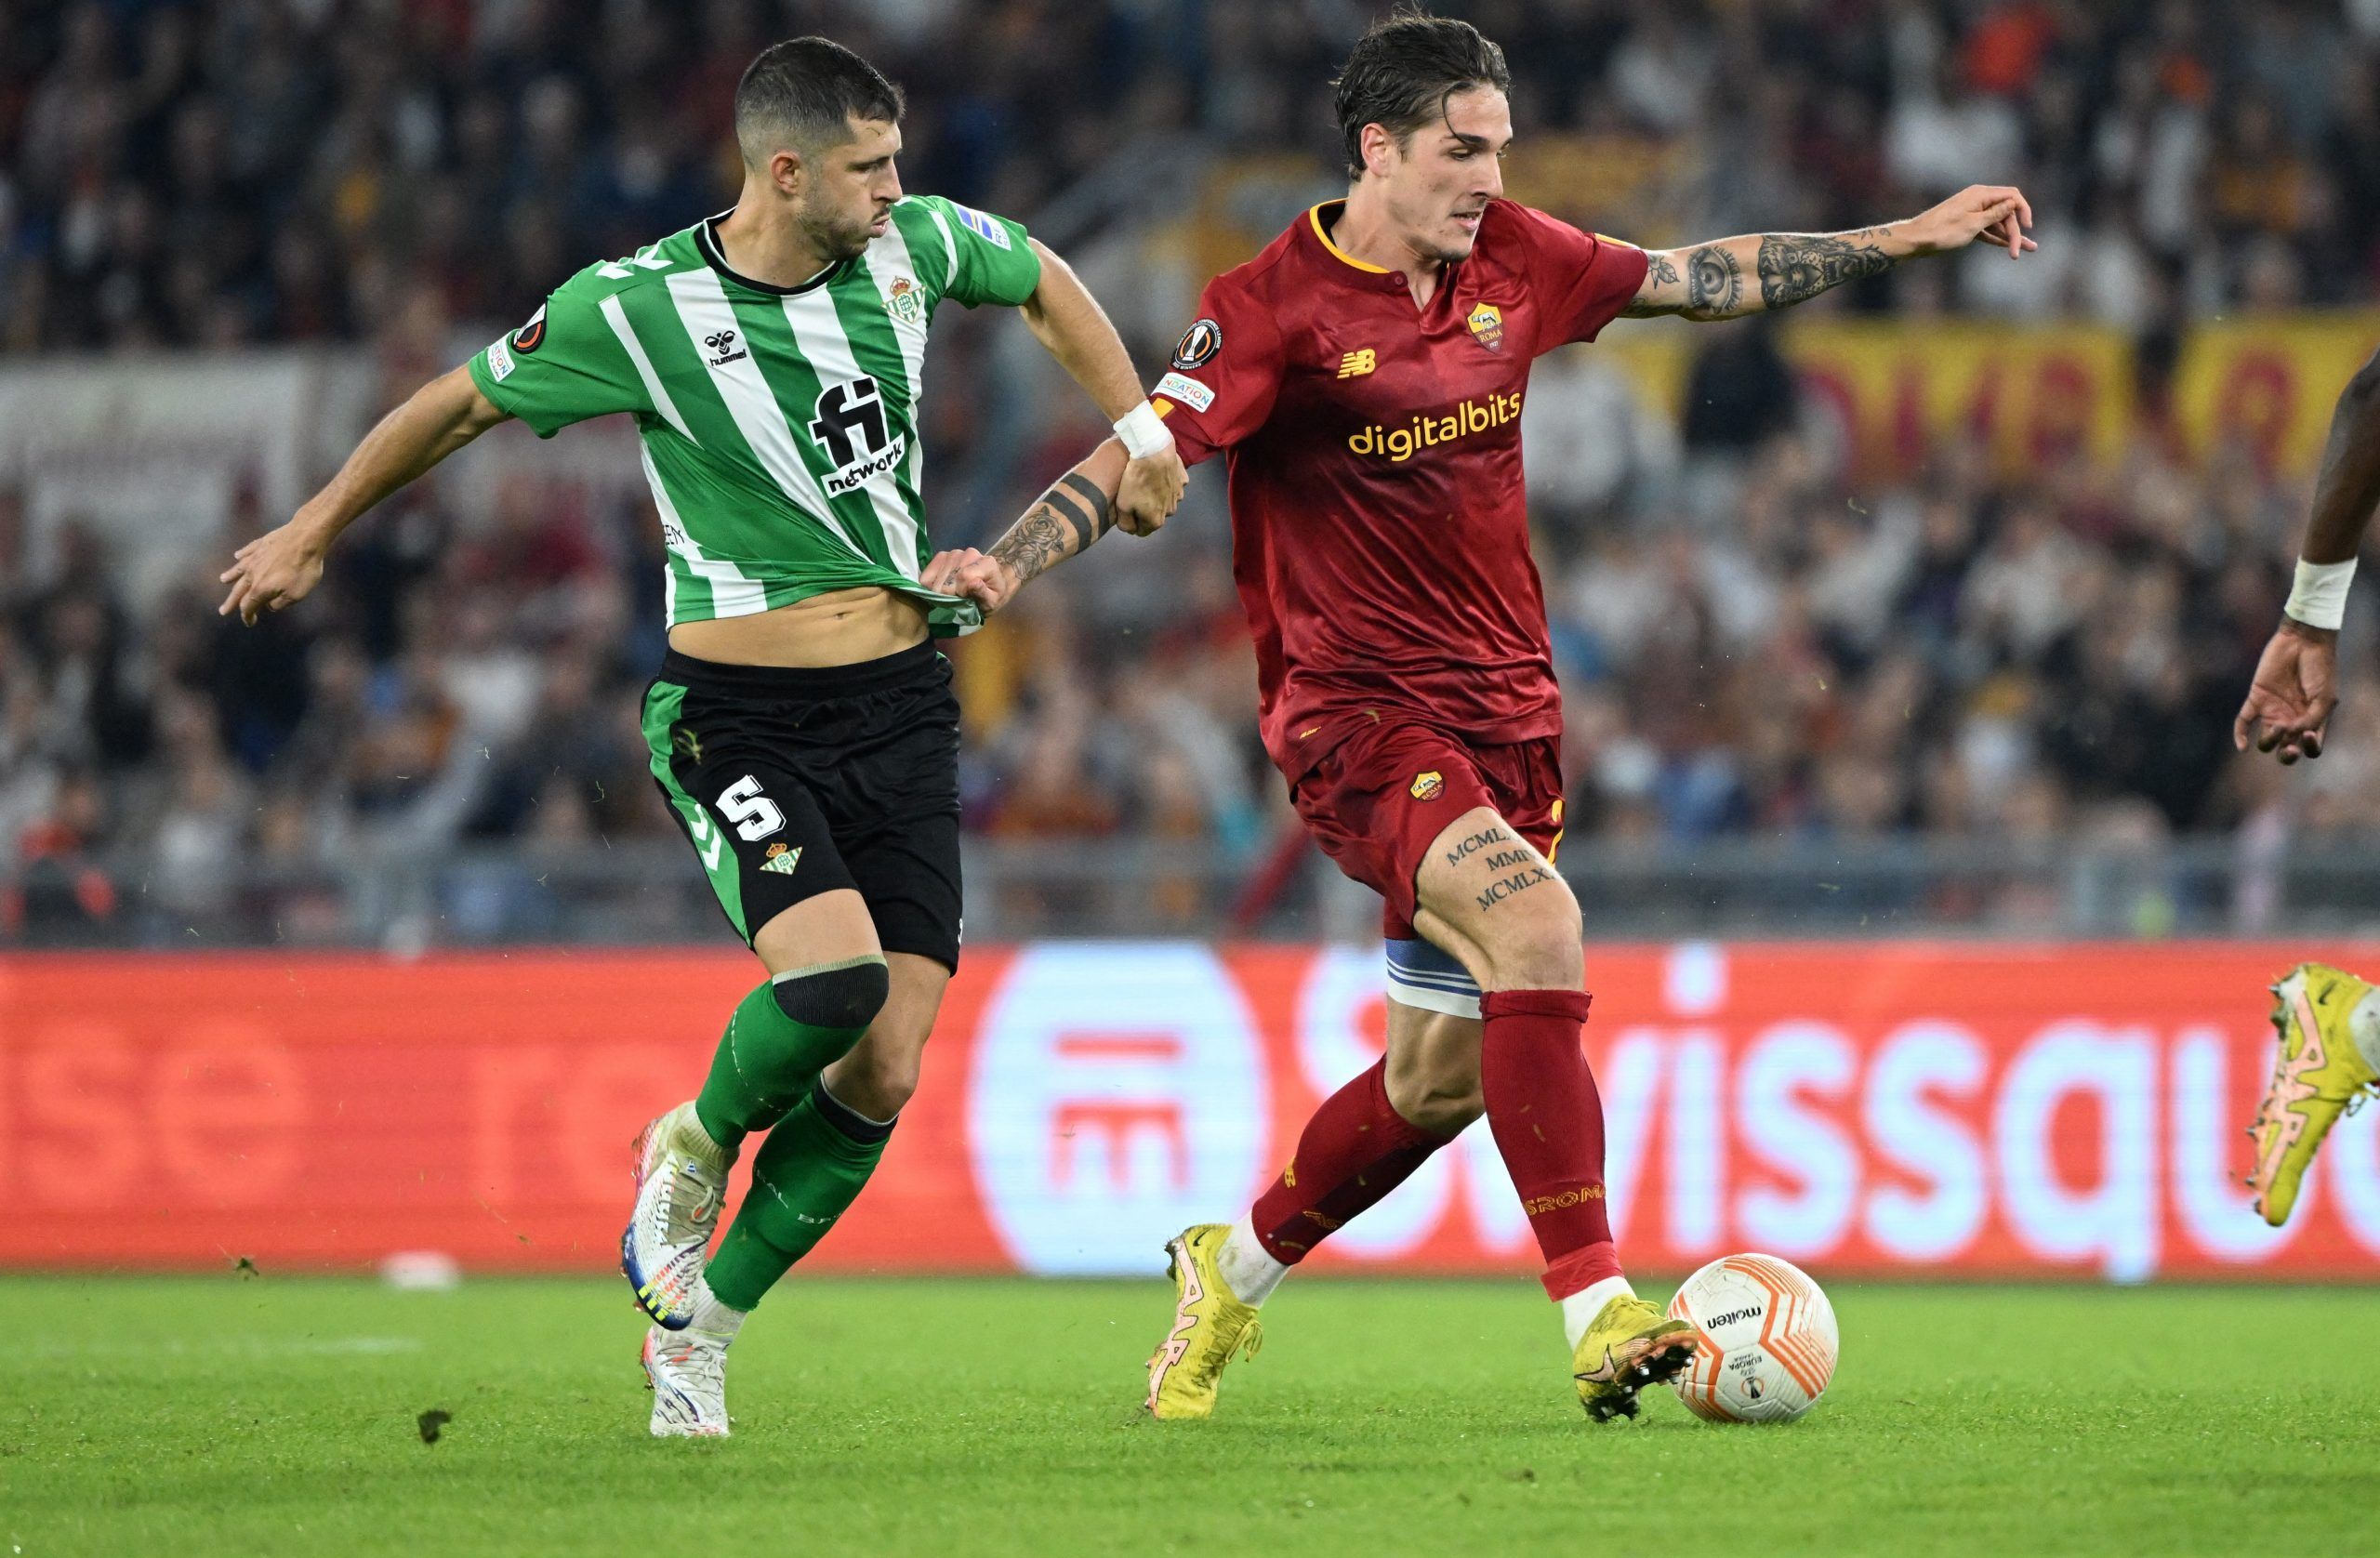 Soccer Football - Europa League - Group C - AS Roma v Real Betis - Stadio Olimpico, Rome, Italy - October 6, 2022  Real Betis' Guido Rodriguez in action with AS Roma's Nicolo Zaniolo REUTERS/Alberto Lingria